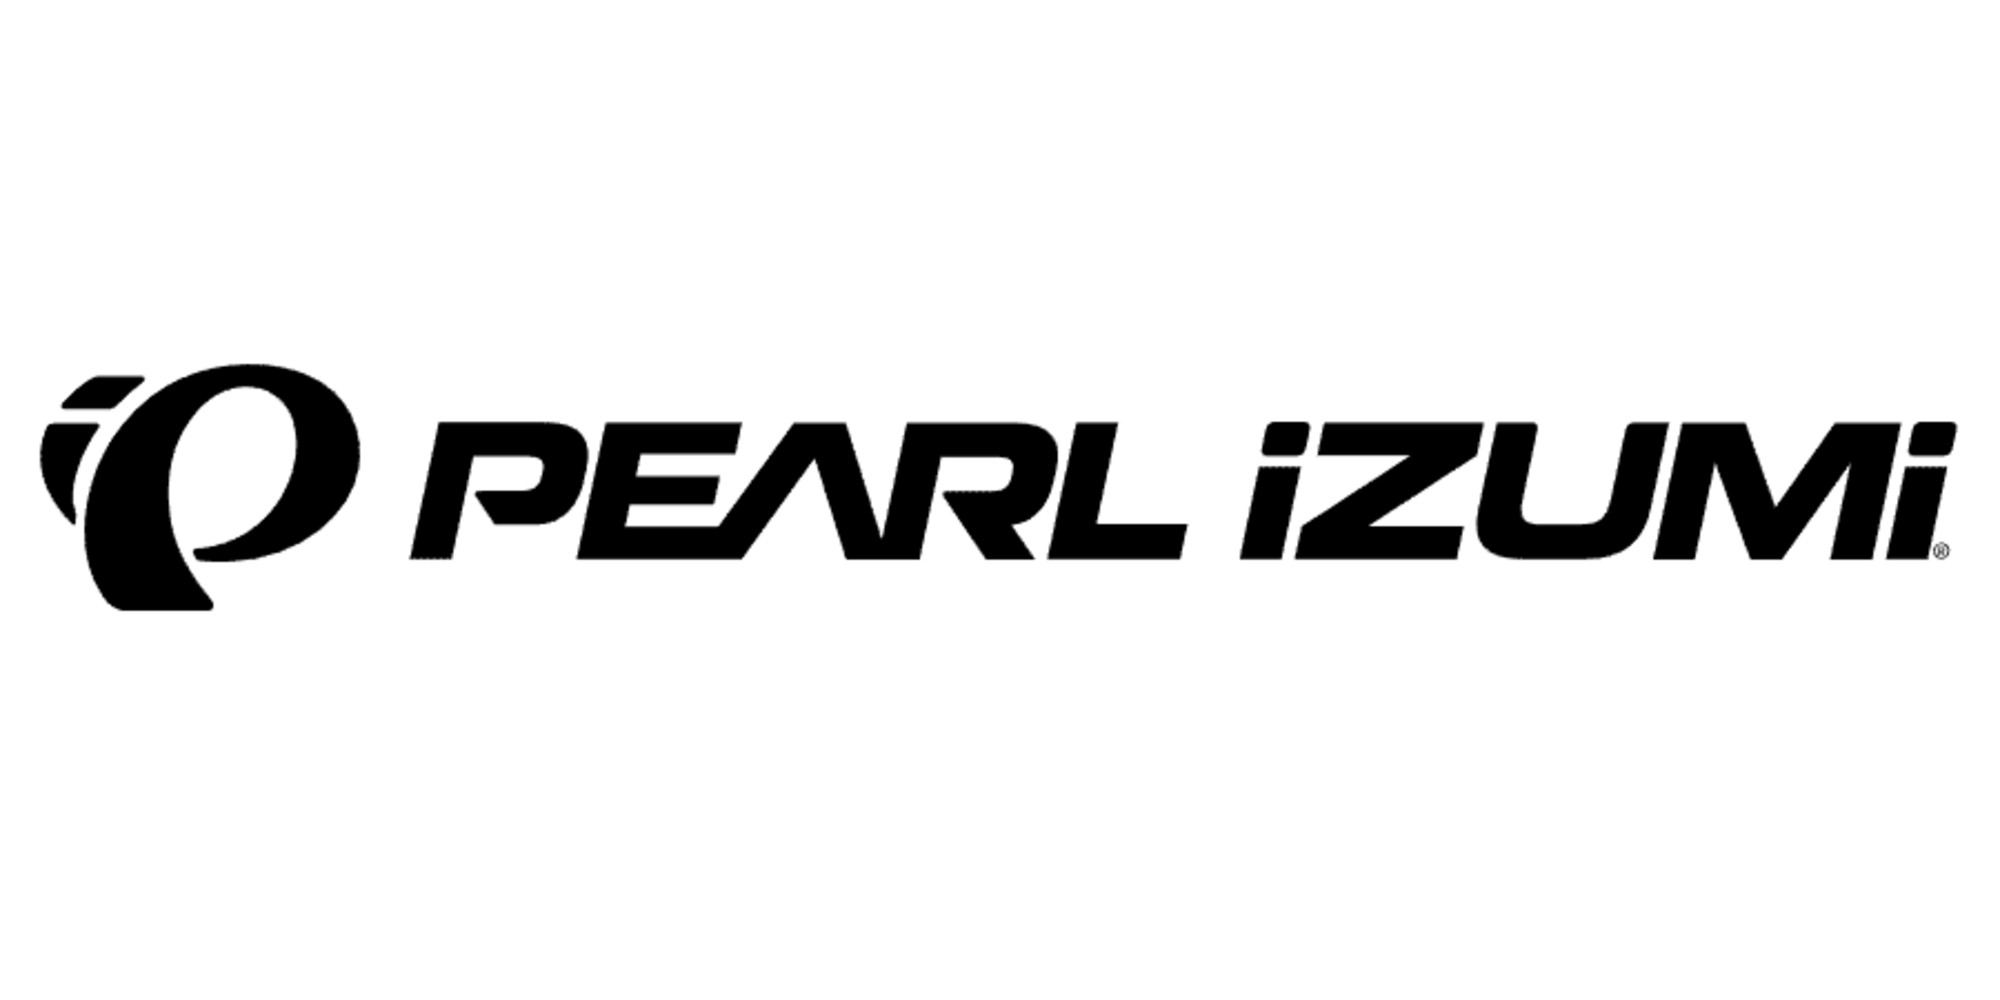 United Sports Brands acquires cycling brand Pearl Izumi from Shimano - News  - BikeBiz